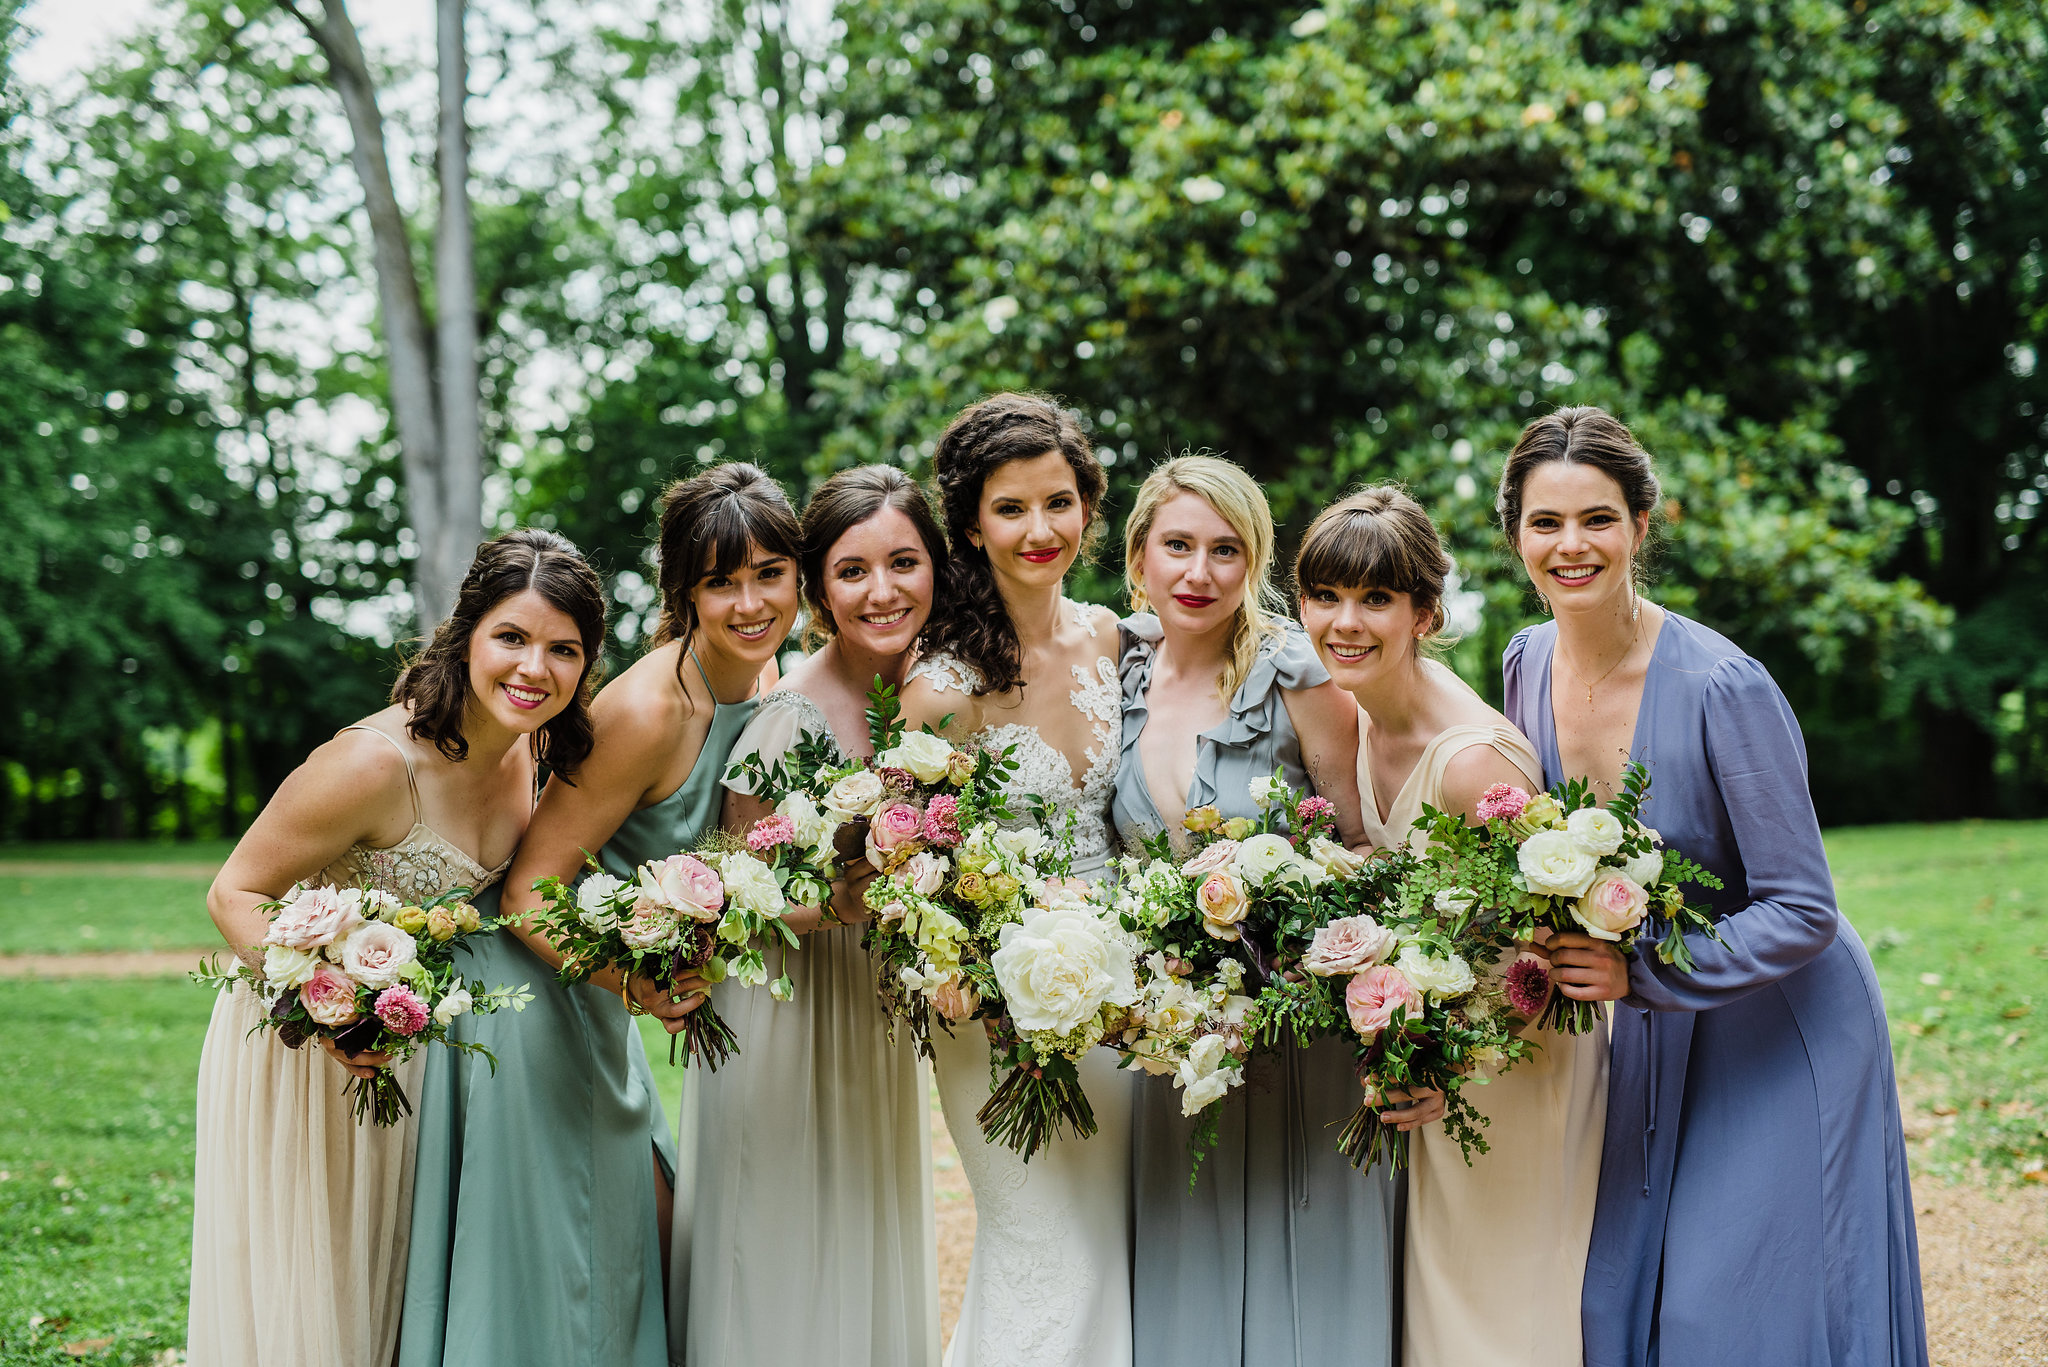 Garden party wedding with neutral, muted flowers with airy, whimsical greenery and texture // Southeastern Wedding Florist